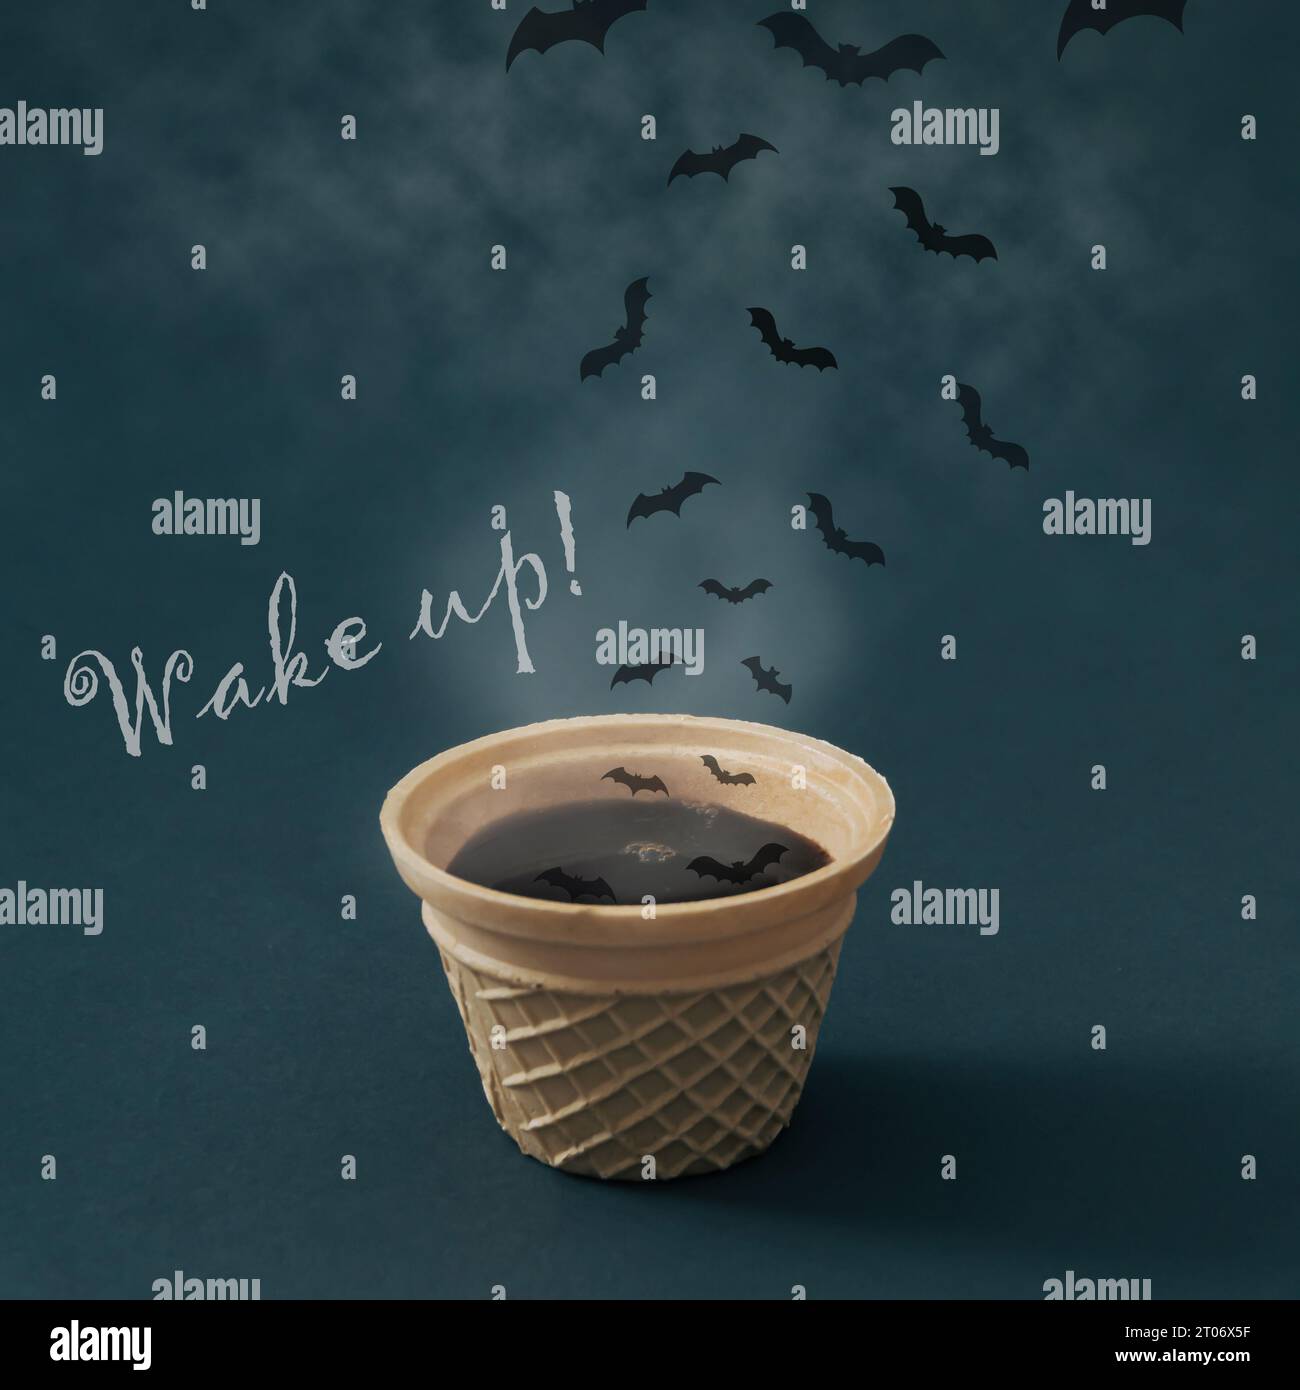 Hot steaming coffee in waffle ice cream cone, clouds and bats with 'Wake up!' message. Minimal coffee concept. Creative ice cream coffee idea. Stock Photo